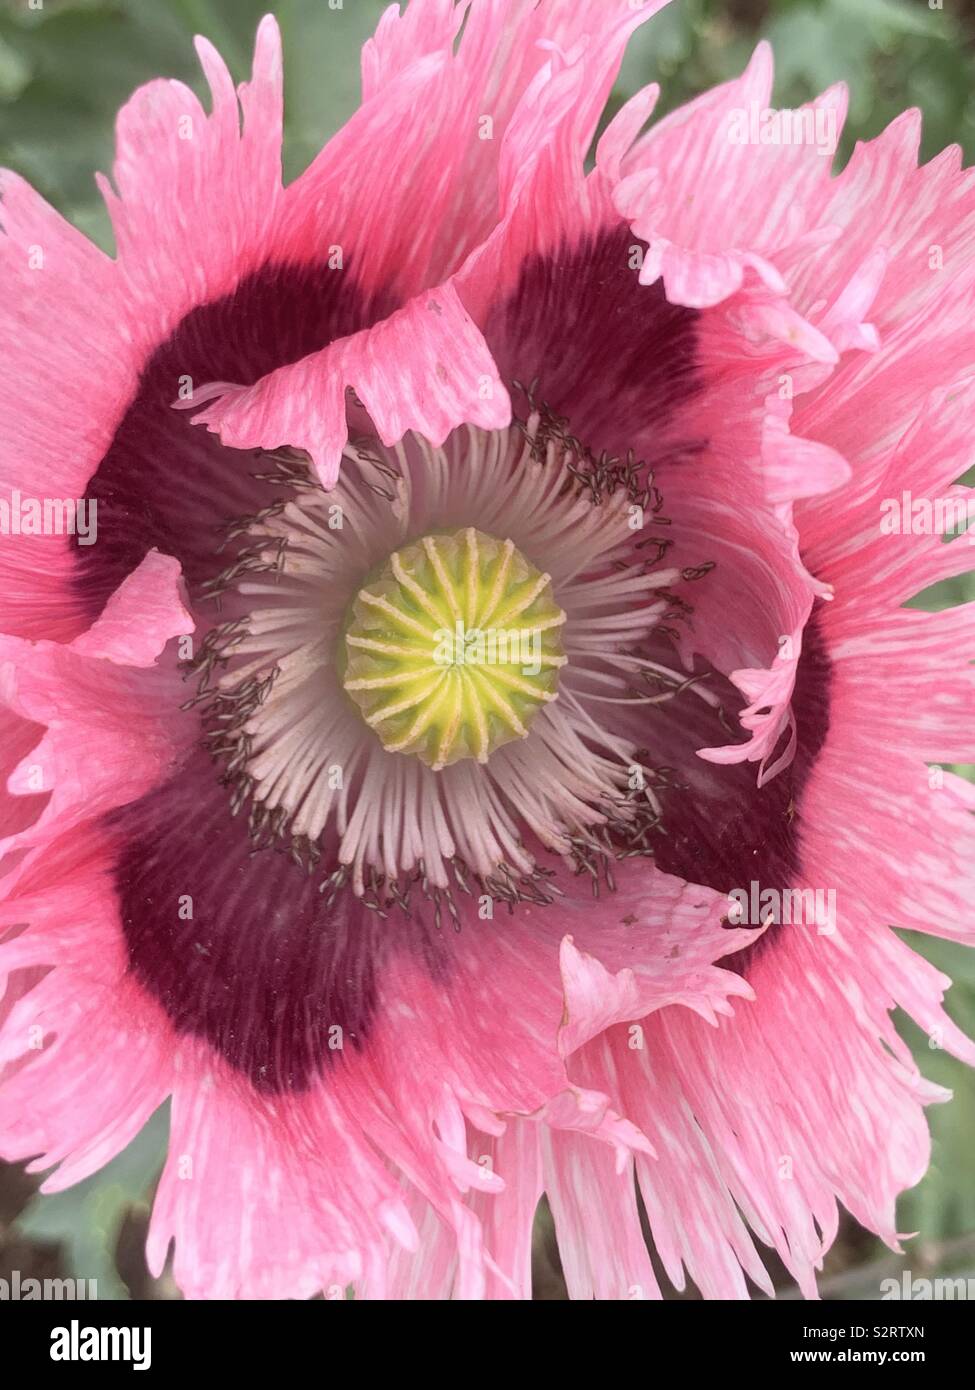 Papaver orientale or oriental poppy garden plant for early summer flowering. Stock Photo